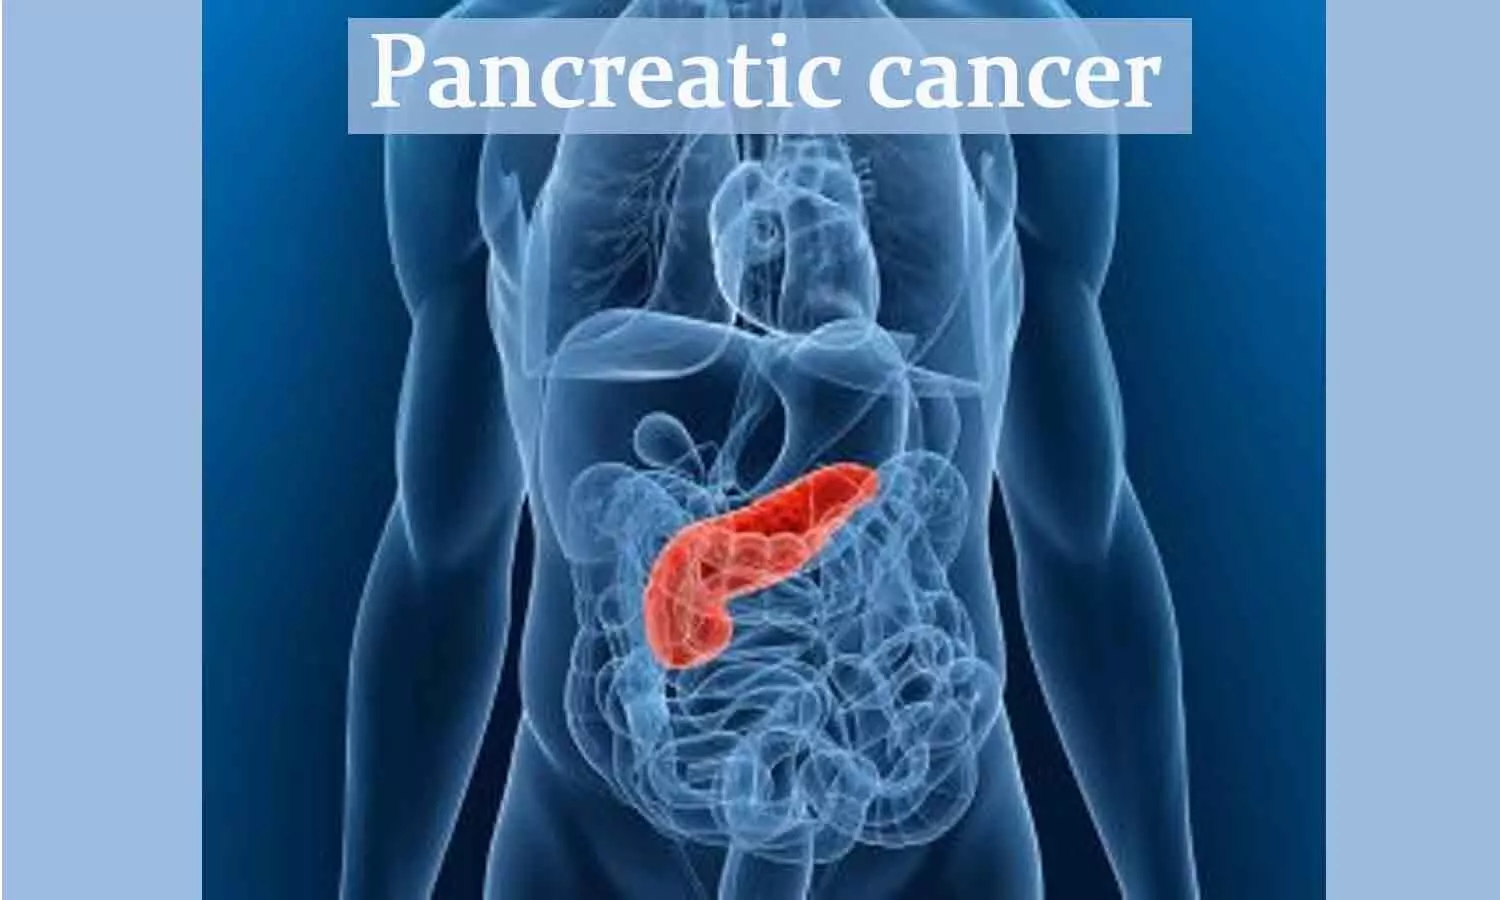 PET/MRI, CT can predict treatment response in pancreatic cancer: Study